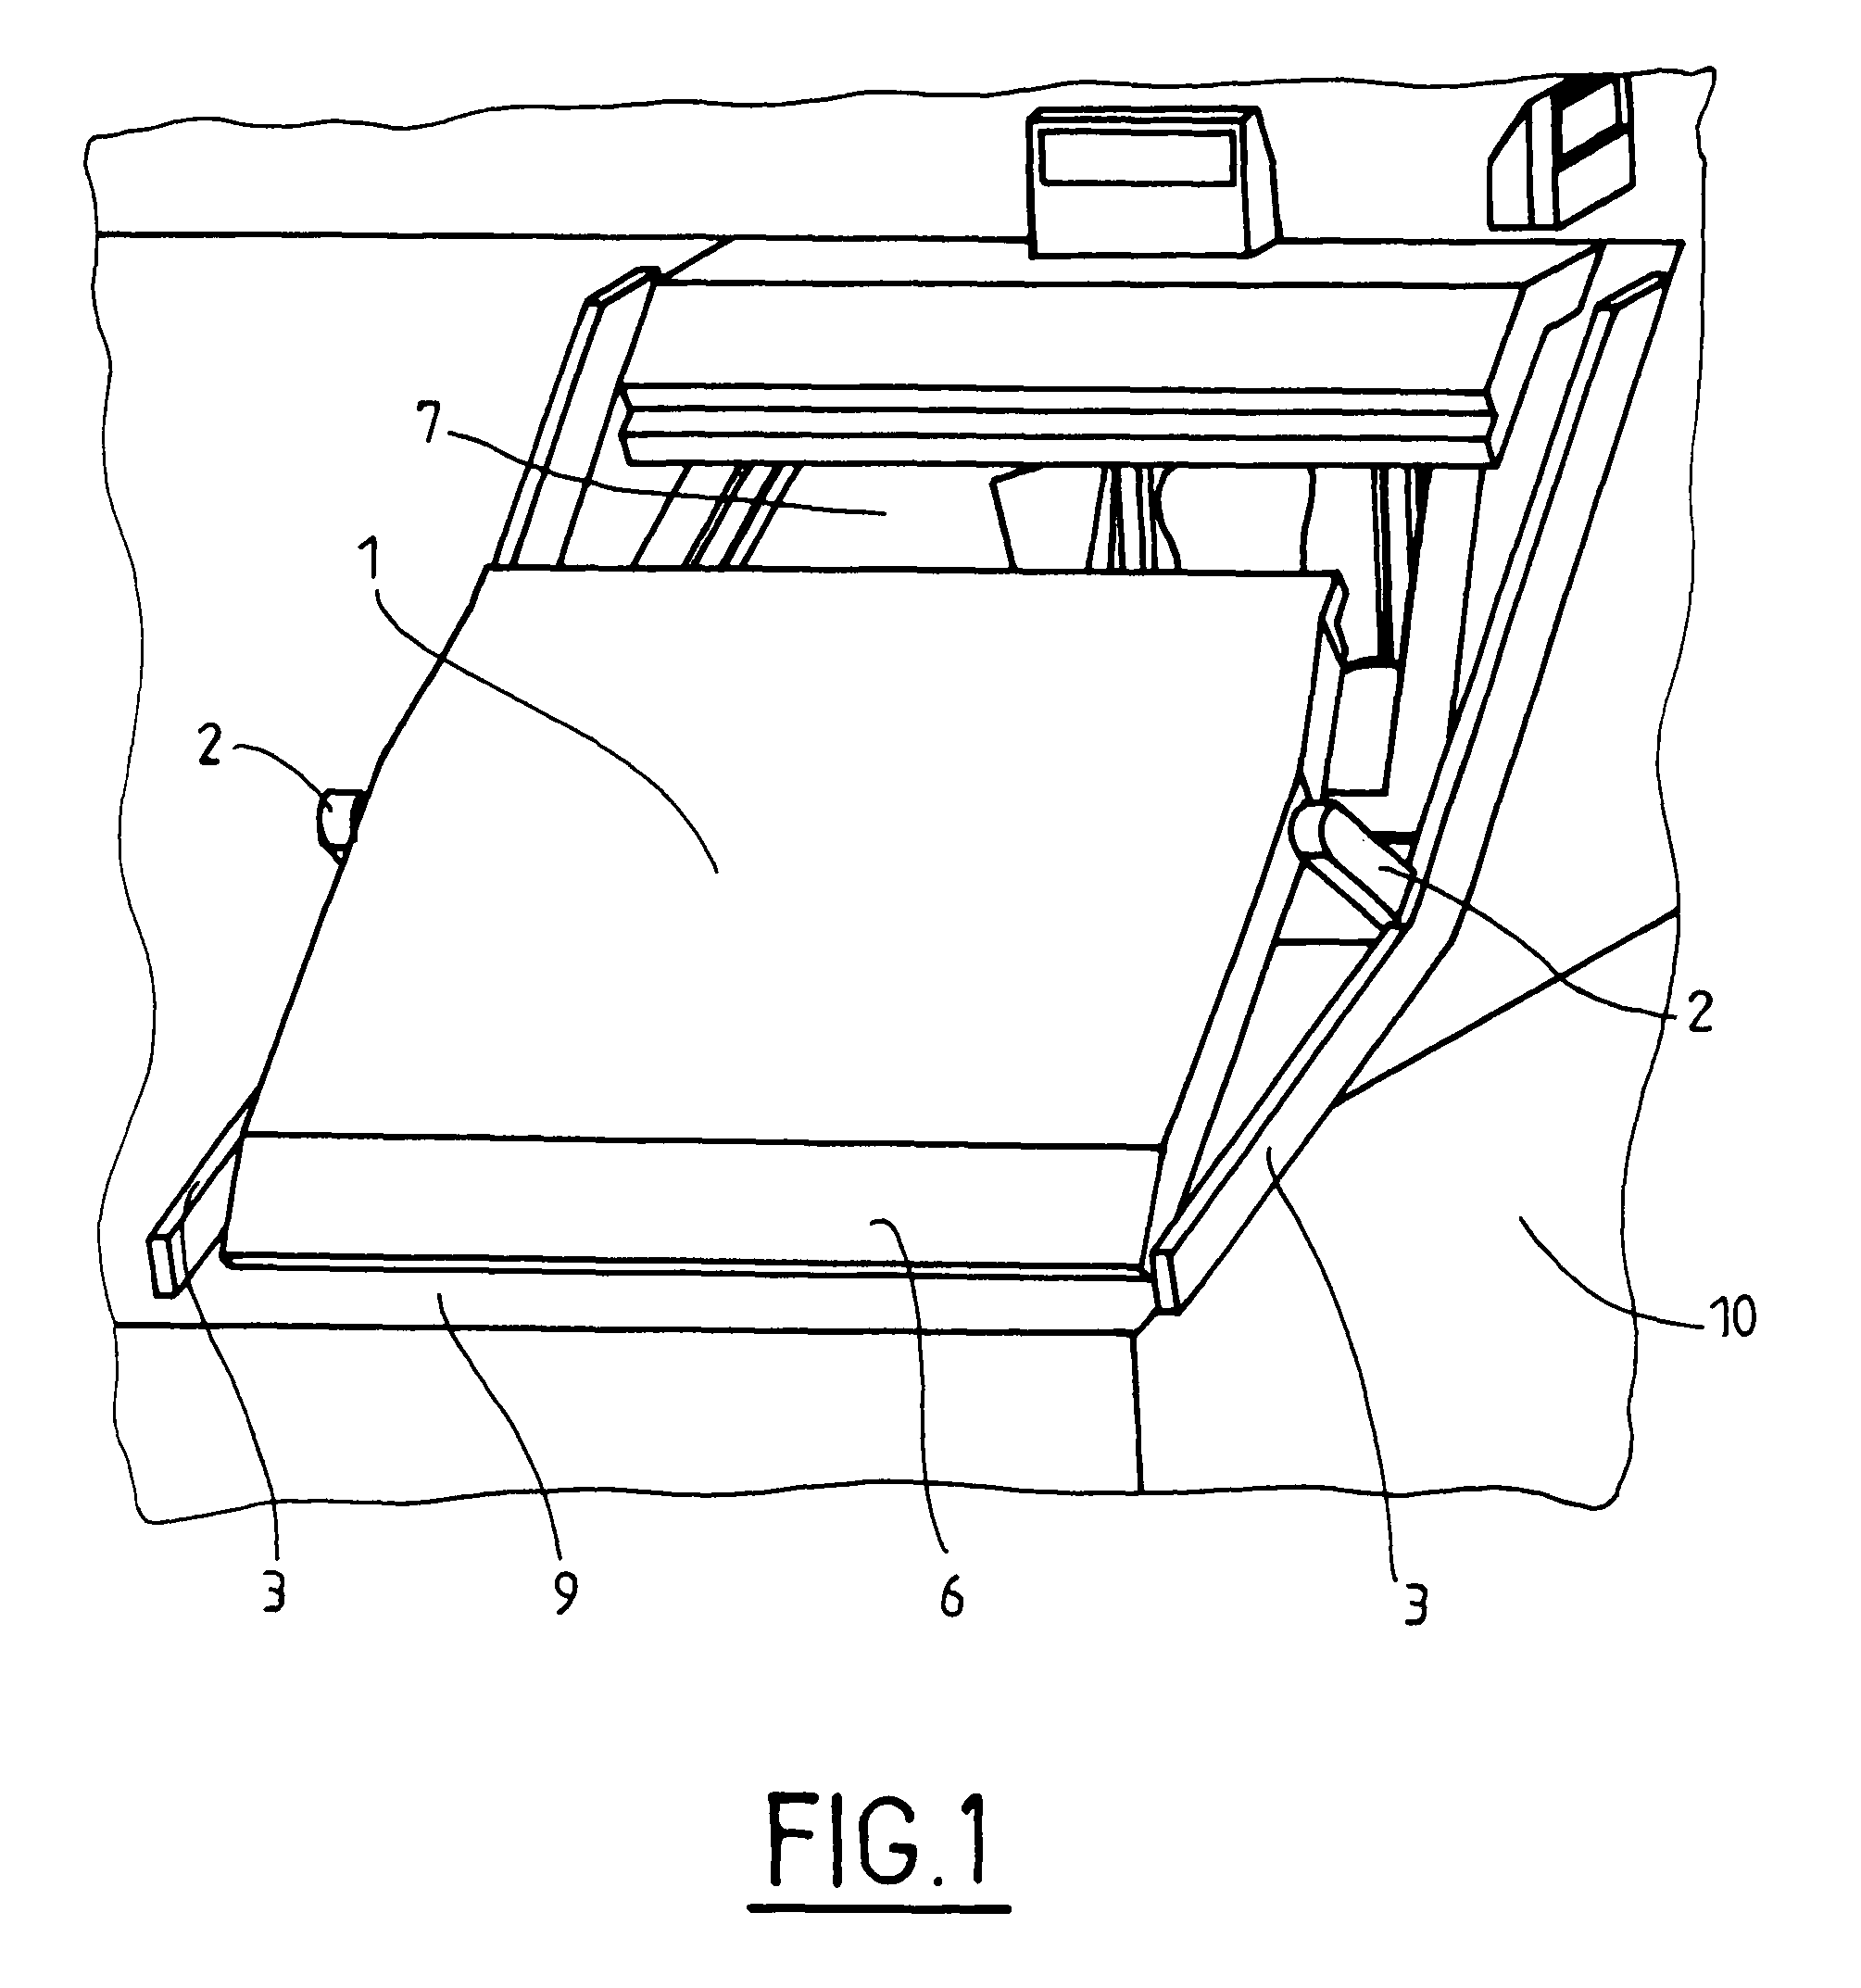 Protection device for an observation screen of a vehicle